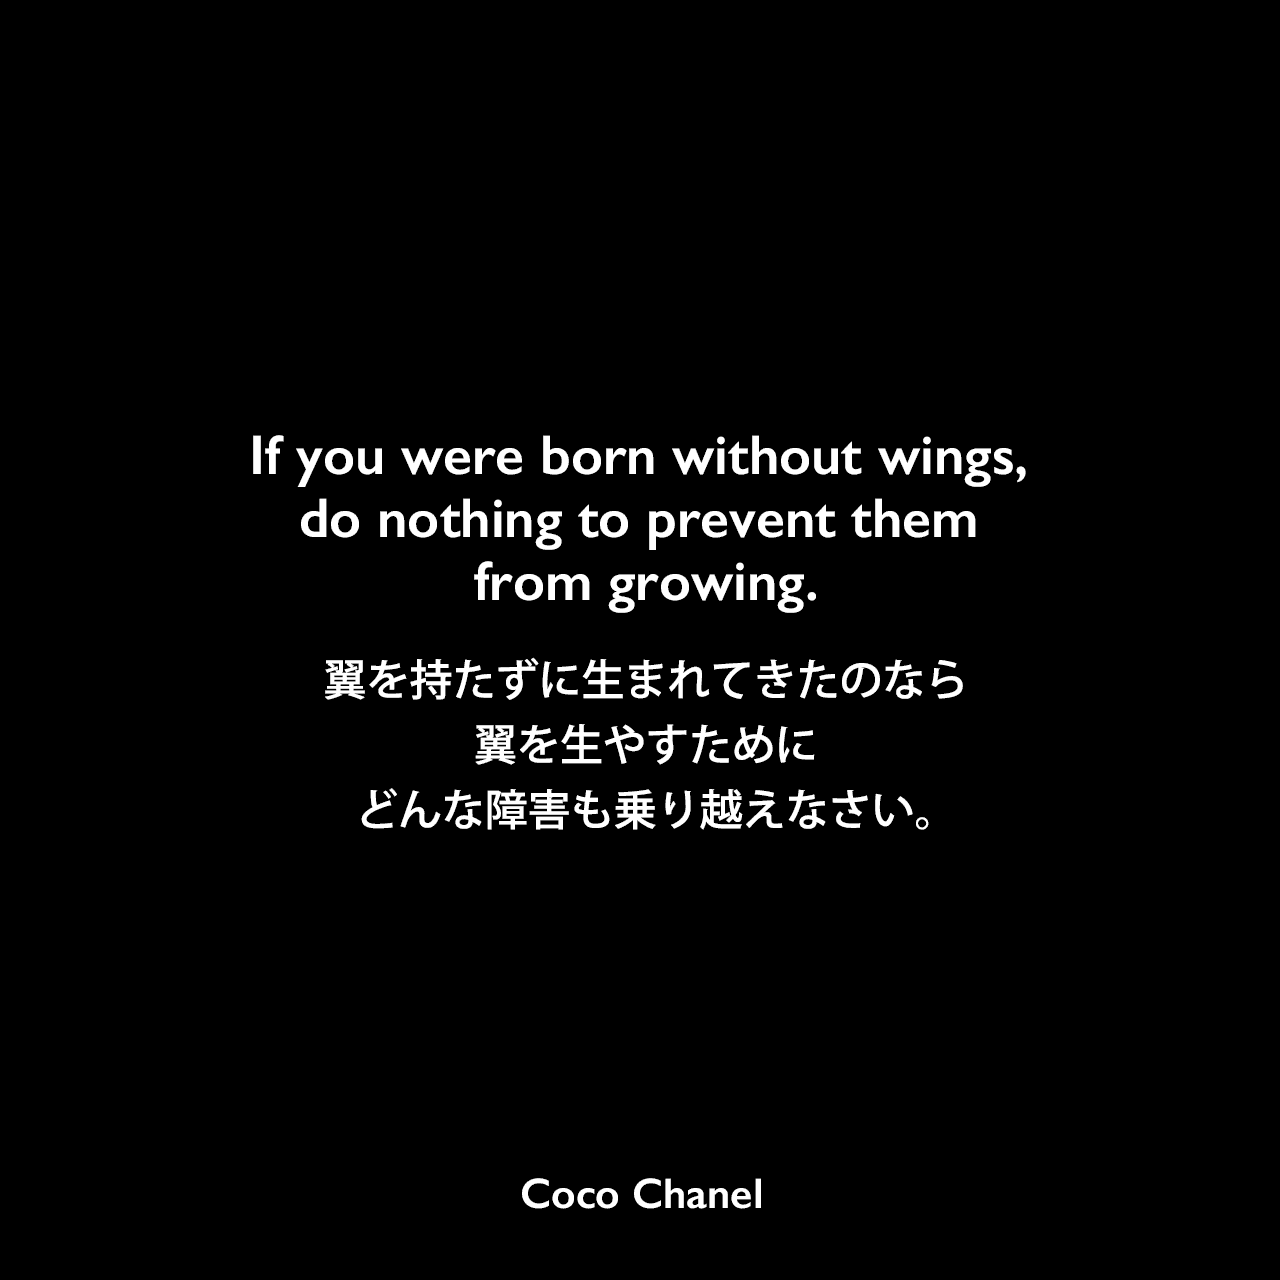 If you were born without wings, do nothing to prevent them from growing.翼を持たずに生まれてきたのなら、翼を生やすために、どんな障害も乗り越えなさい。